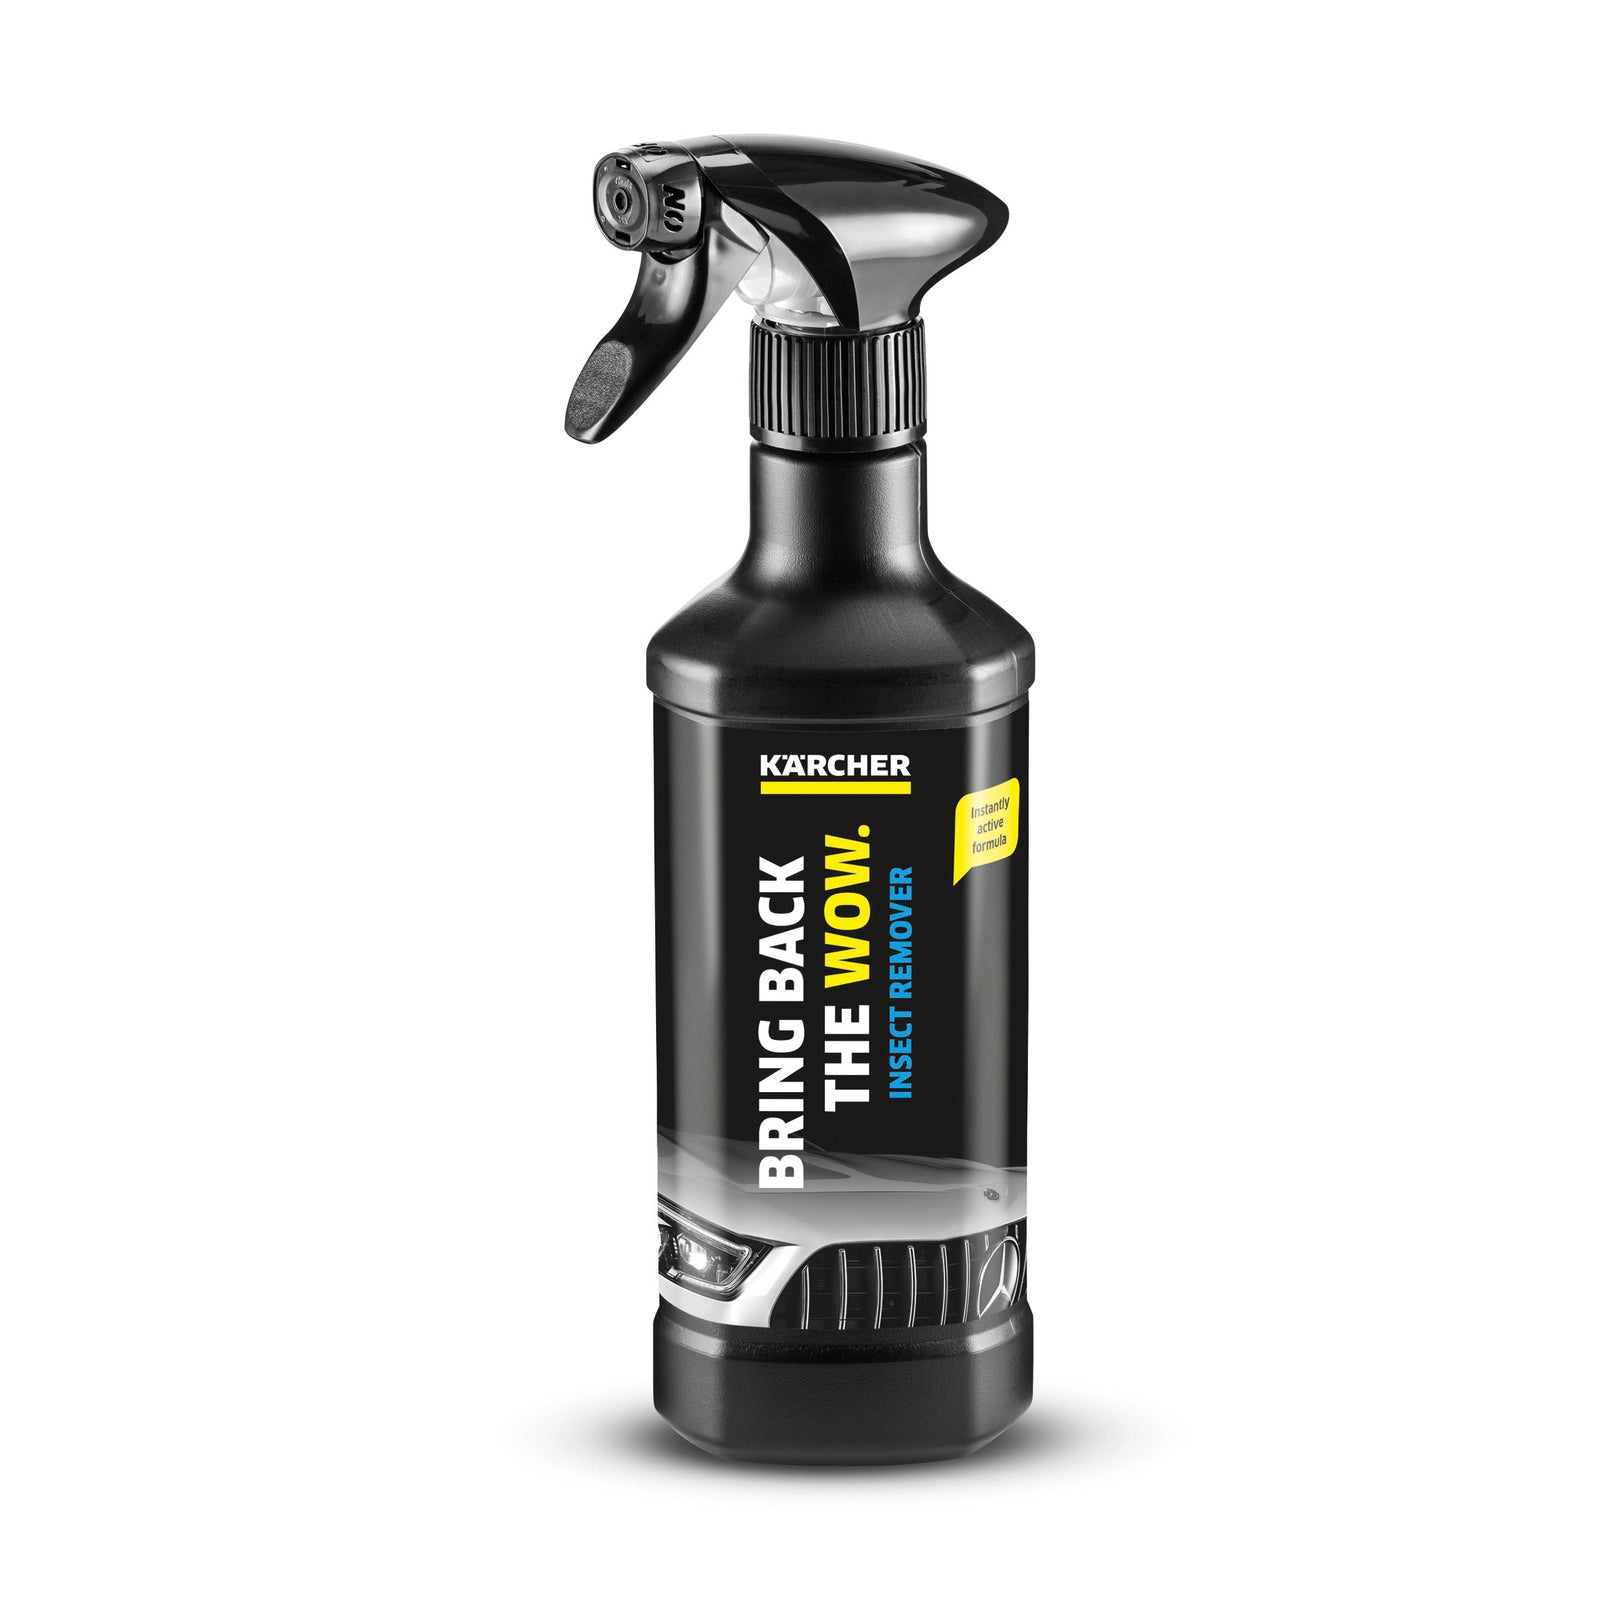 Kärcher insect remover, 500 ml